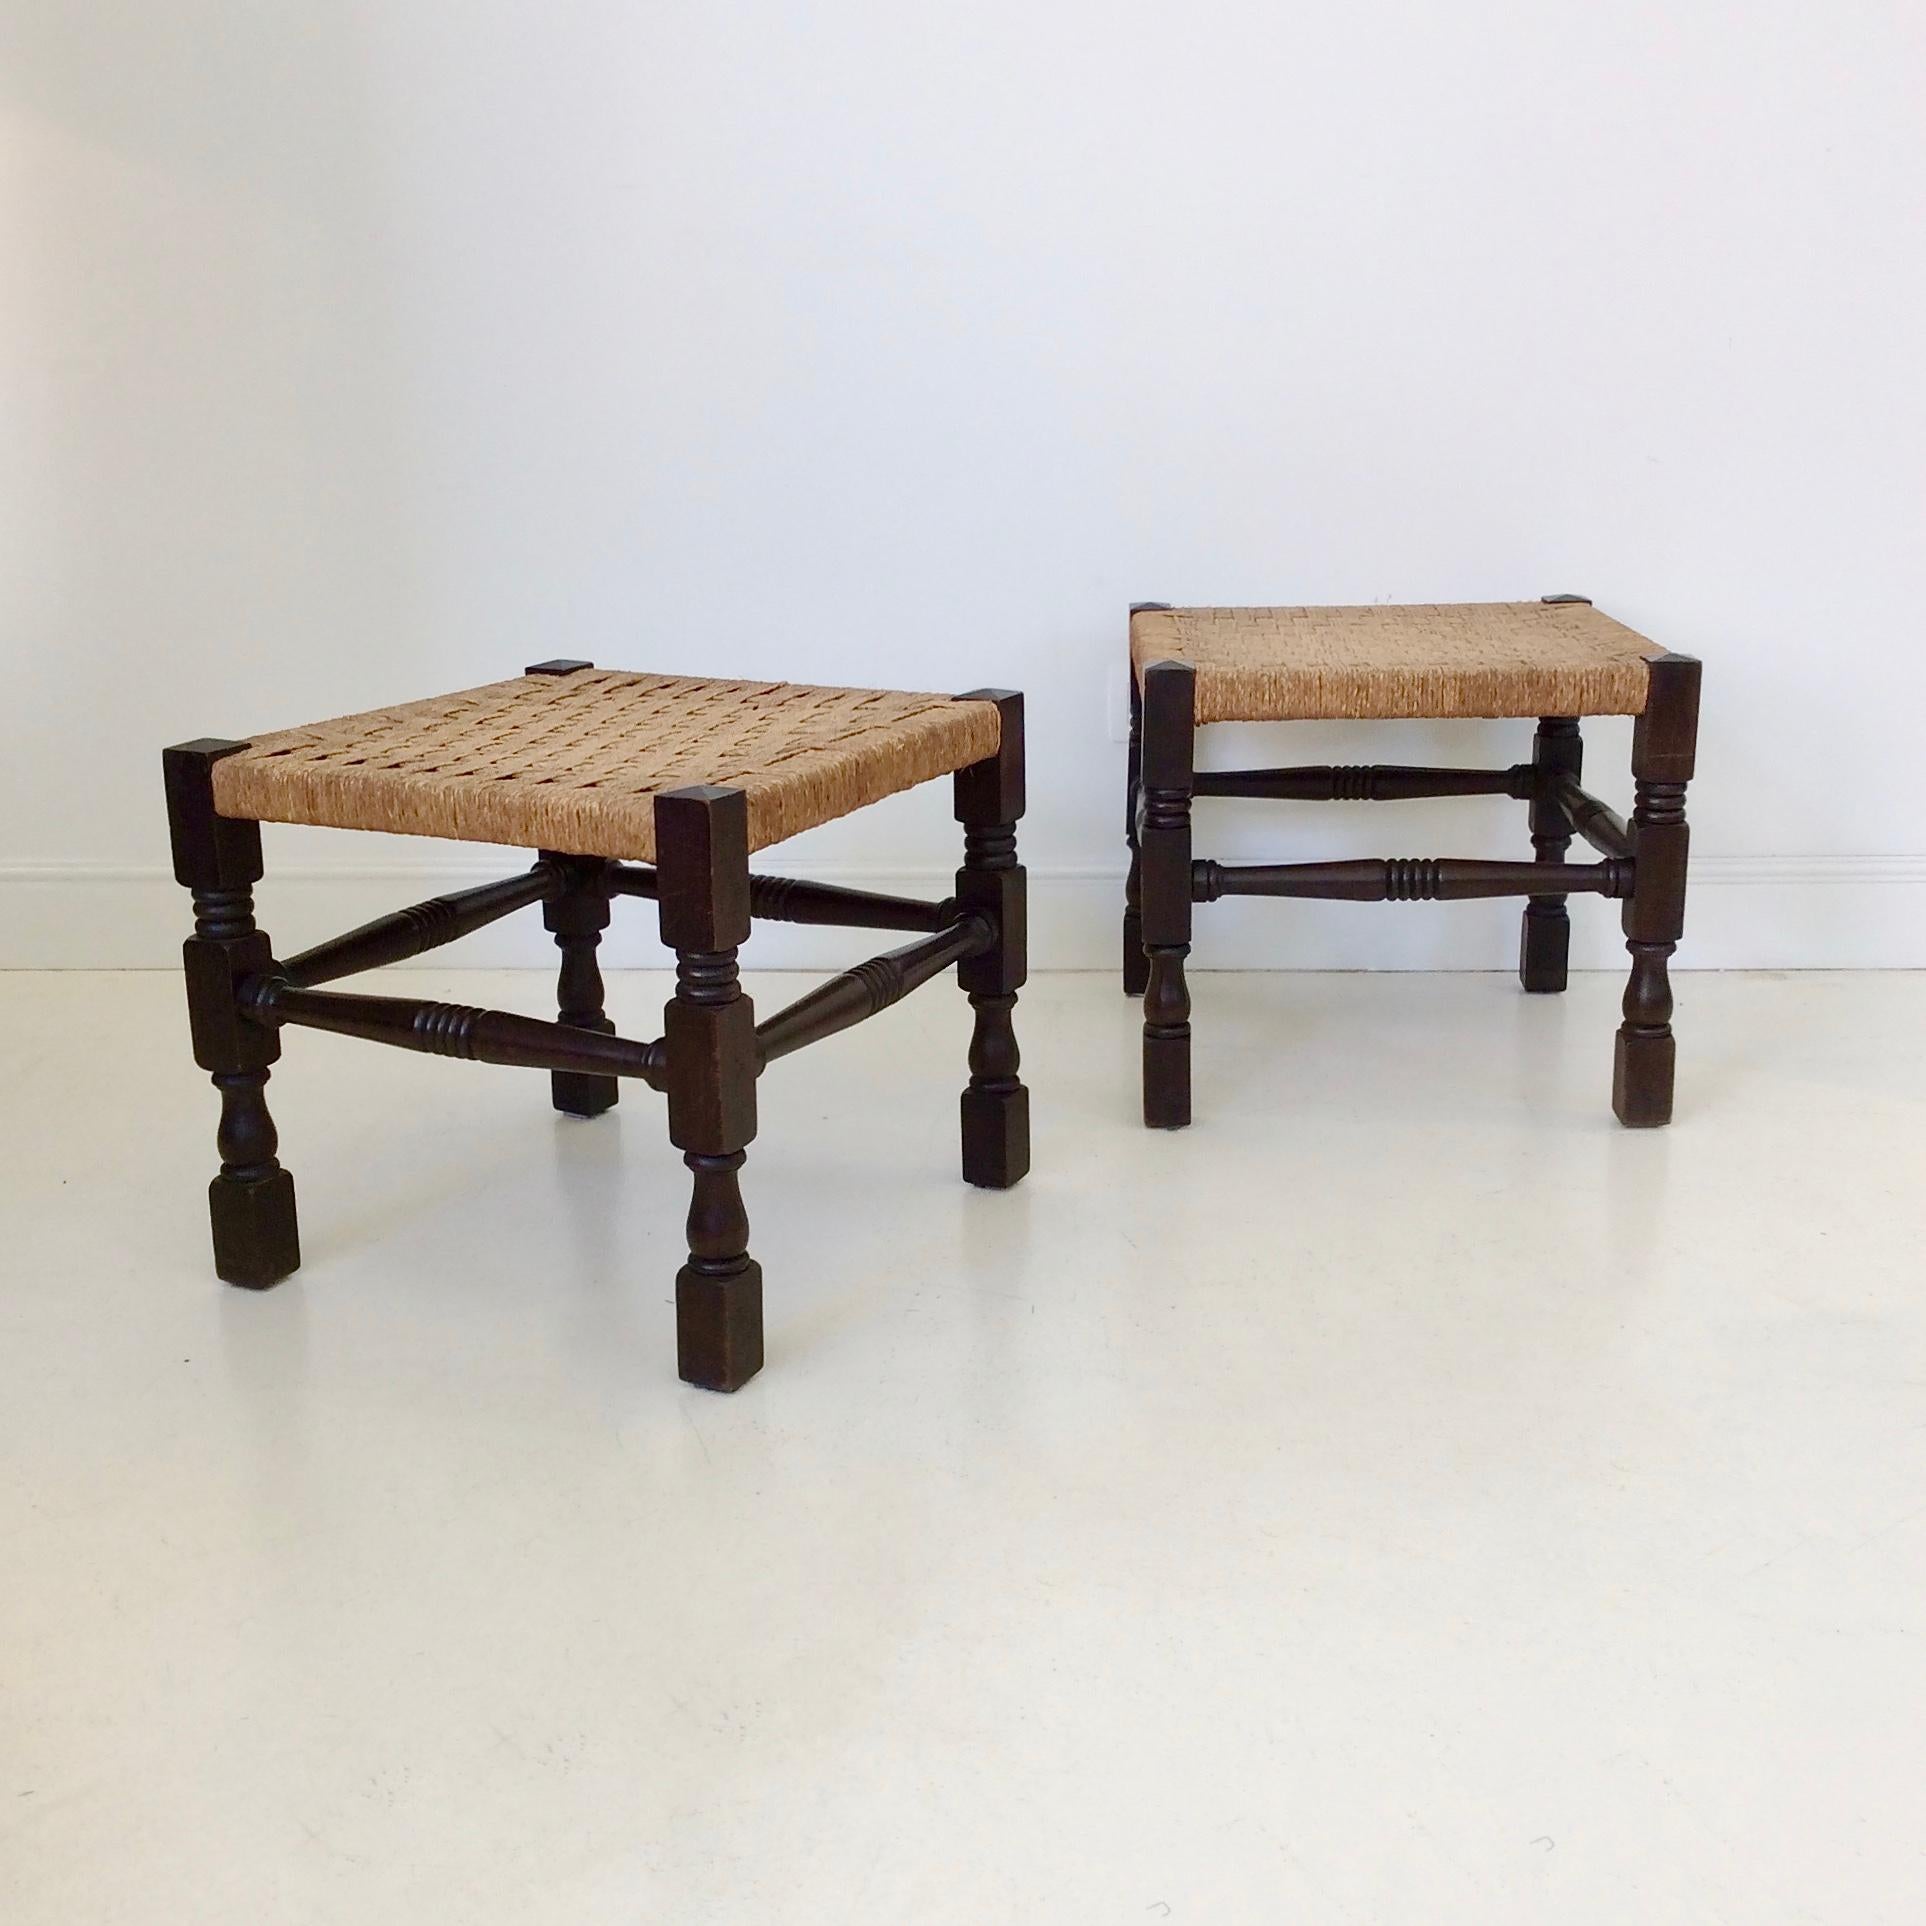 Nice pair of stools, early 20th century.
Dark turned wood and original rope seats.
Good condition.
All purchases are covered by our Buyer Protection Guarantee.
This item can be returned within 14 days of delivery.
We ship worldwide, please ask us